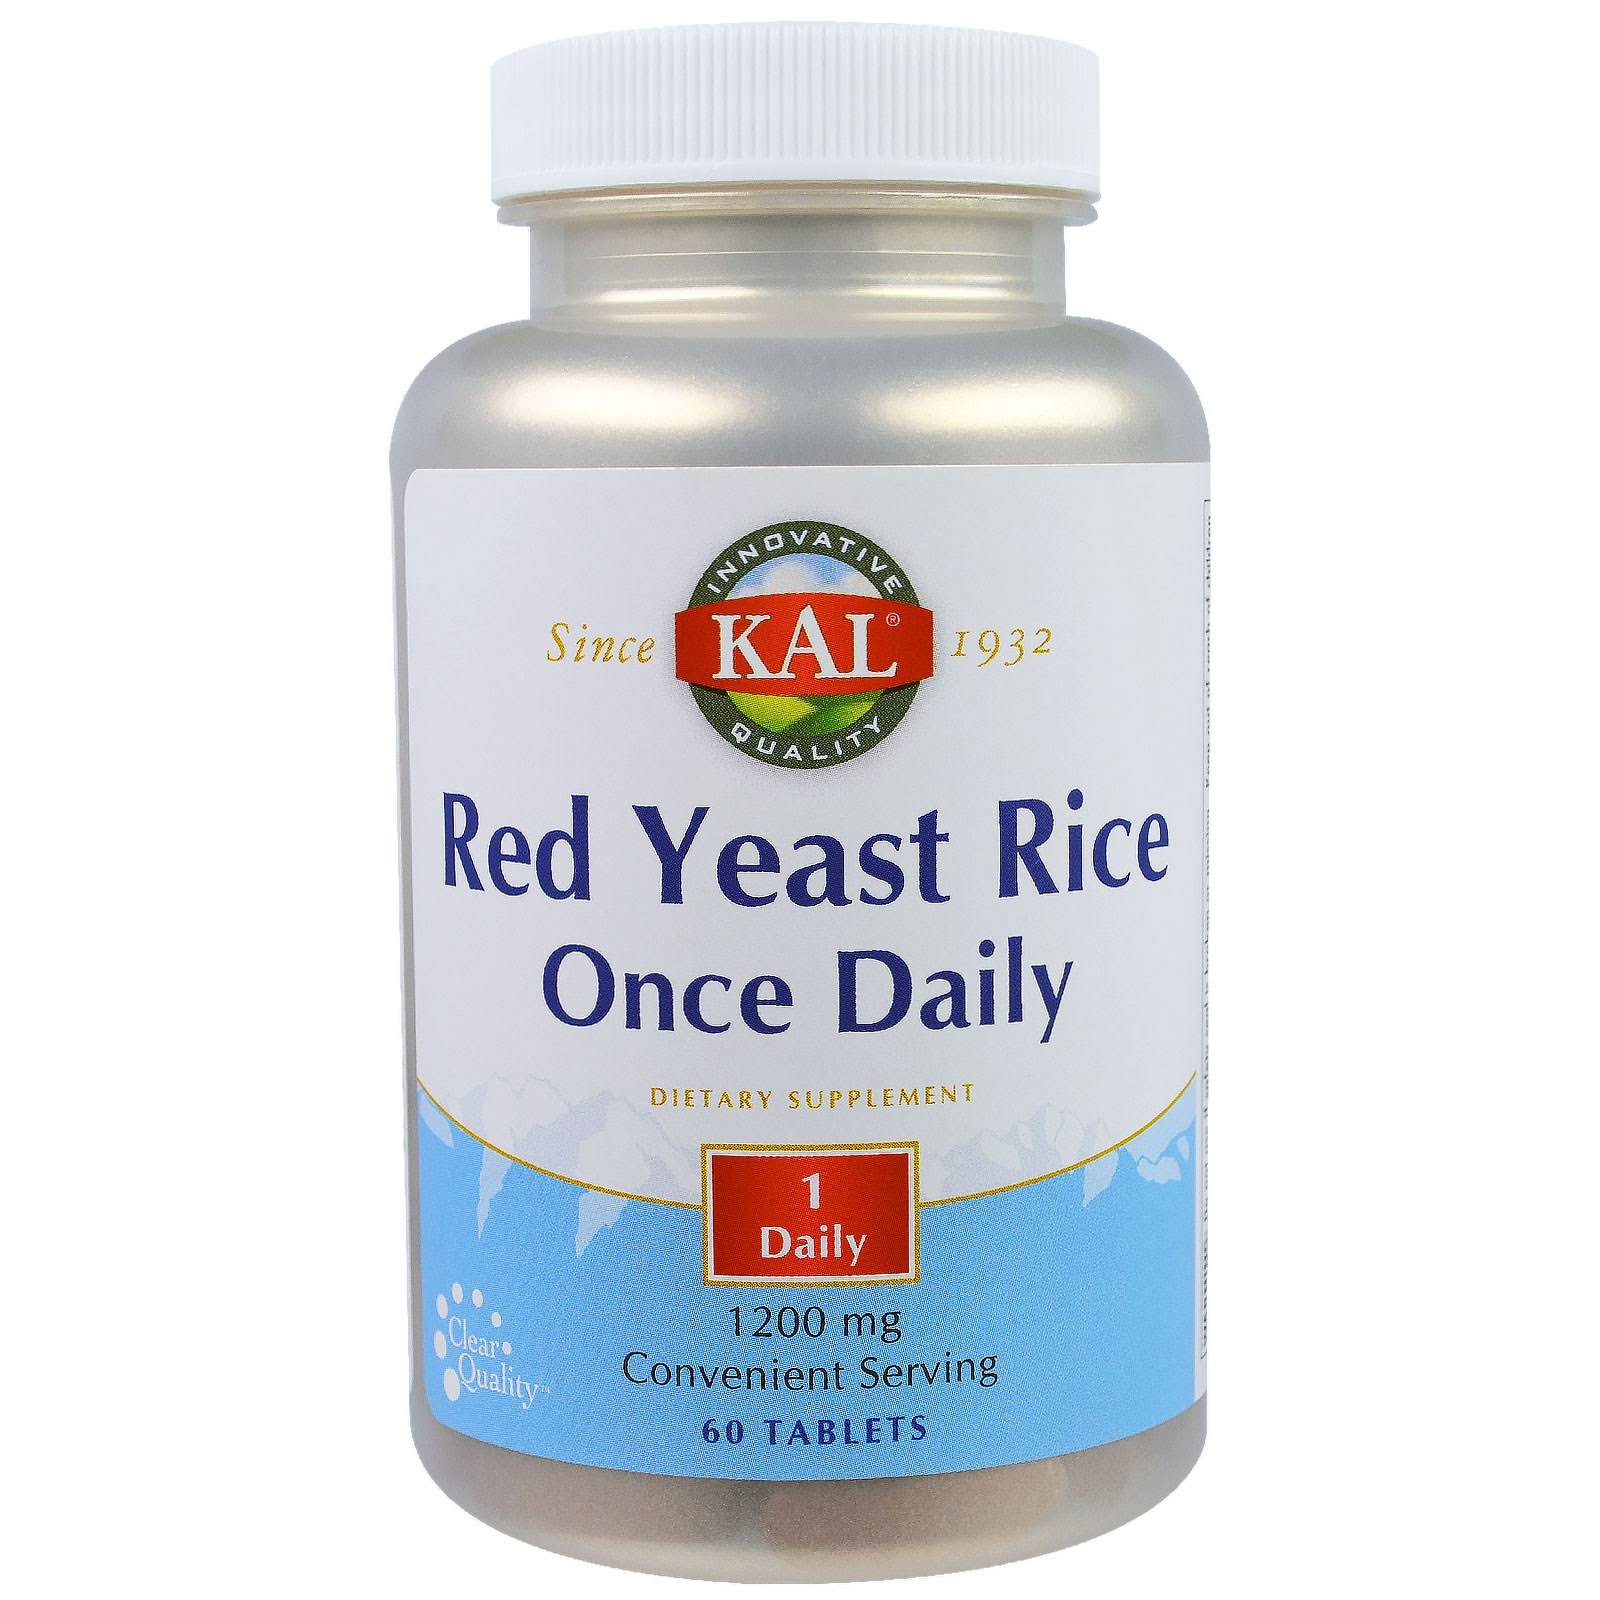 Kal Once Daily Red Yeast Rice Dietary Supplement - 60 Tablets